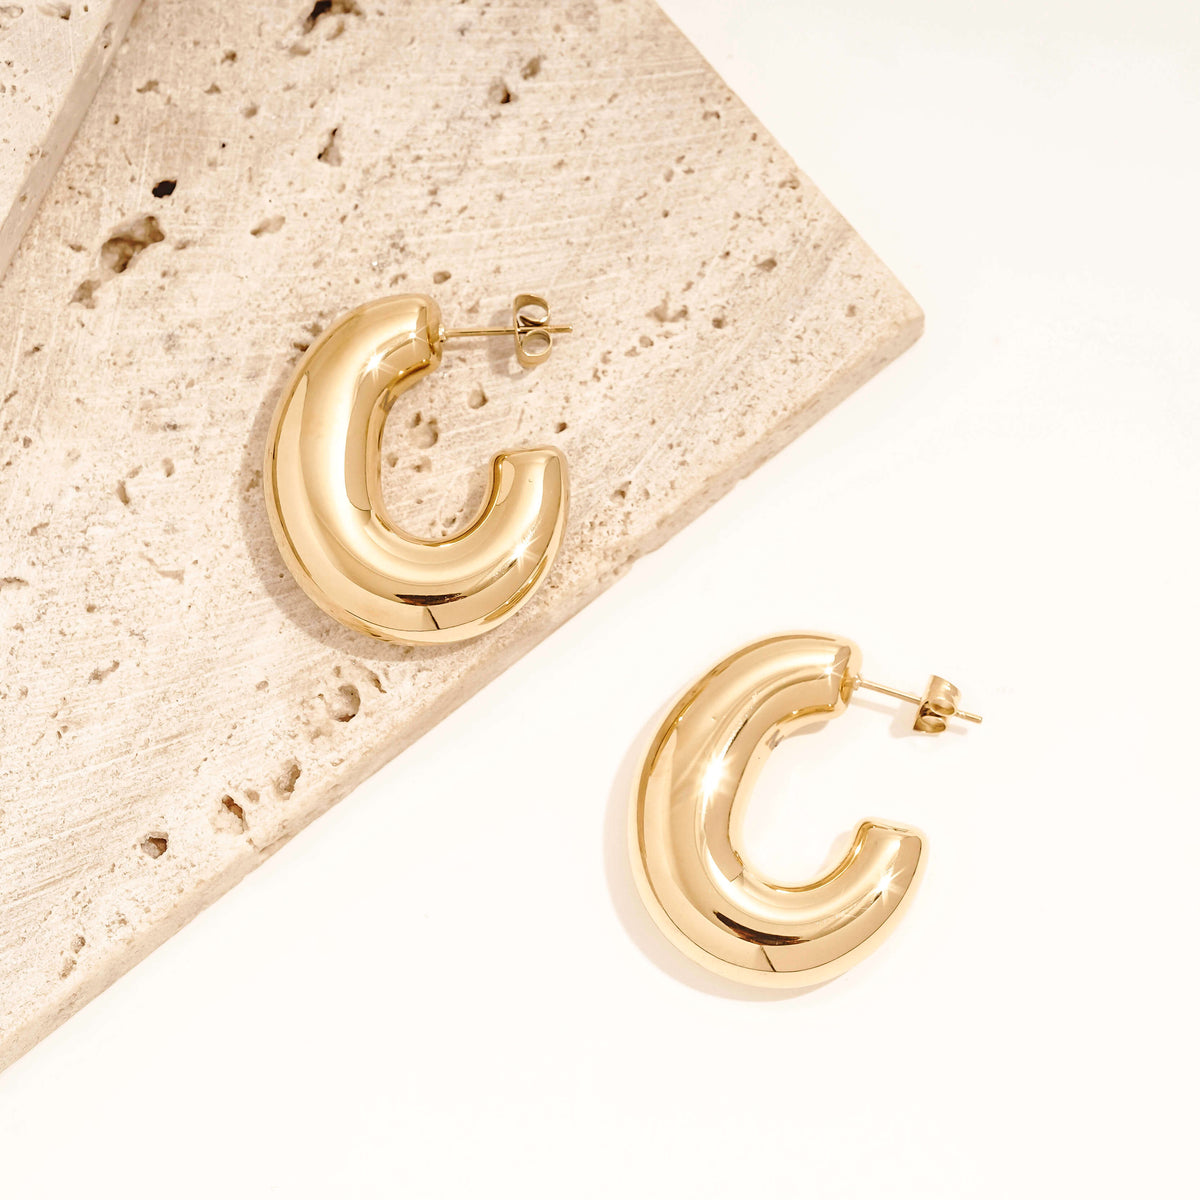 large, chunky hoop earrings that are statement hoops. they have a bubble or balloon like appearance. 